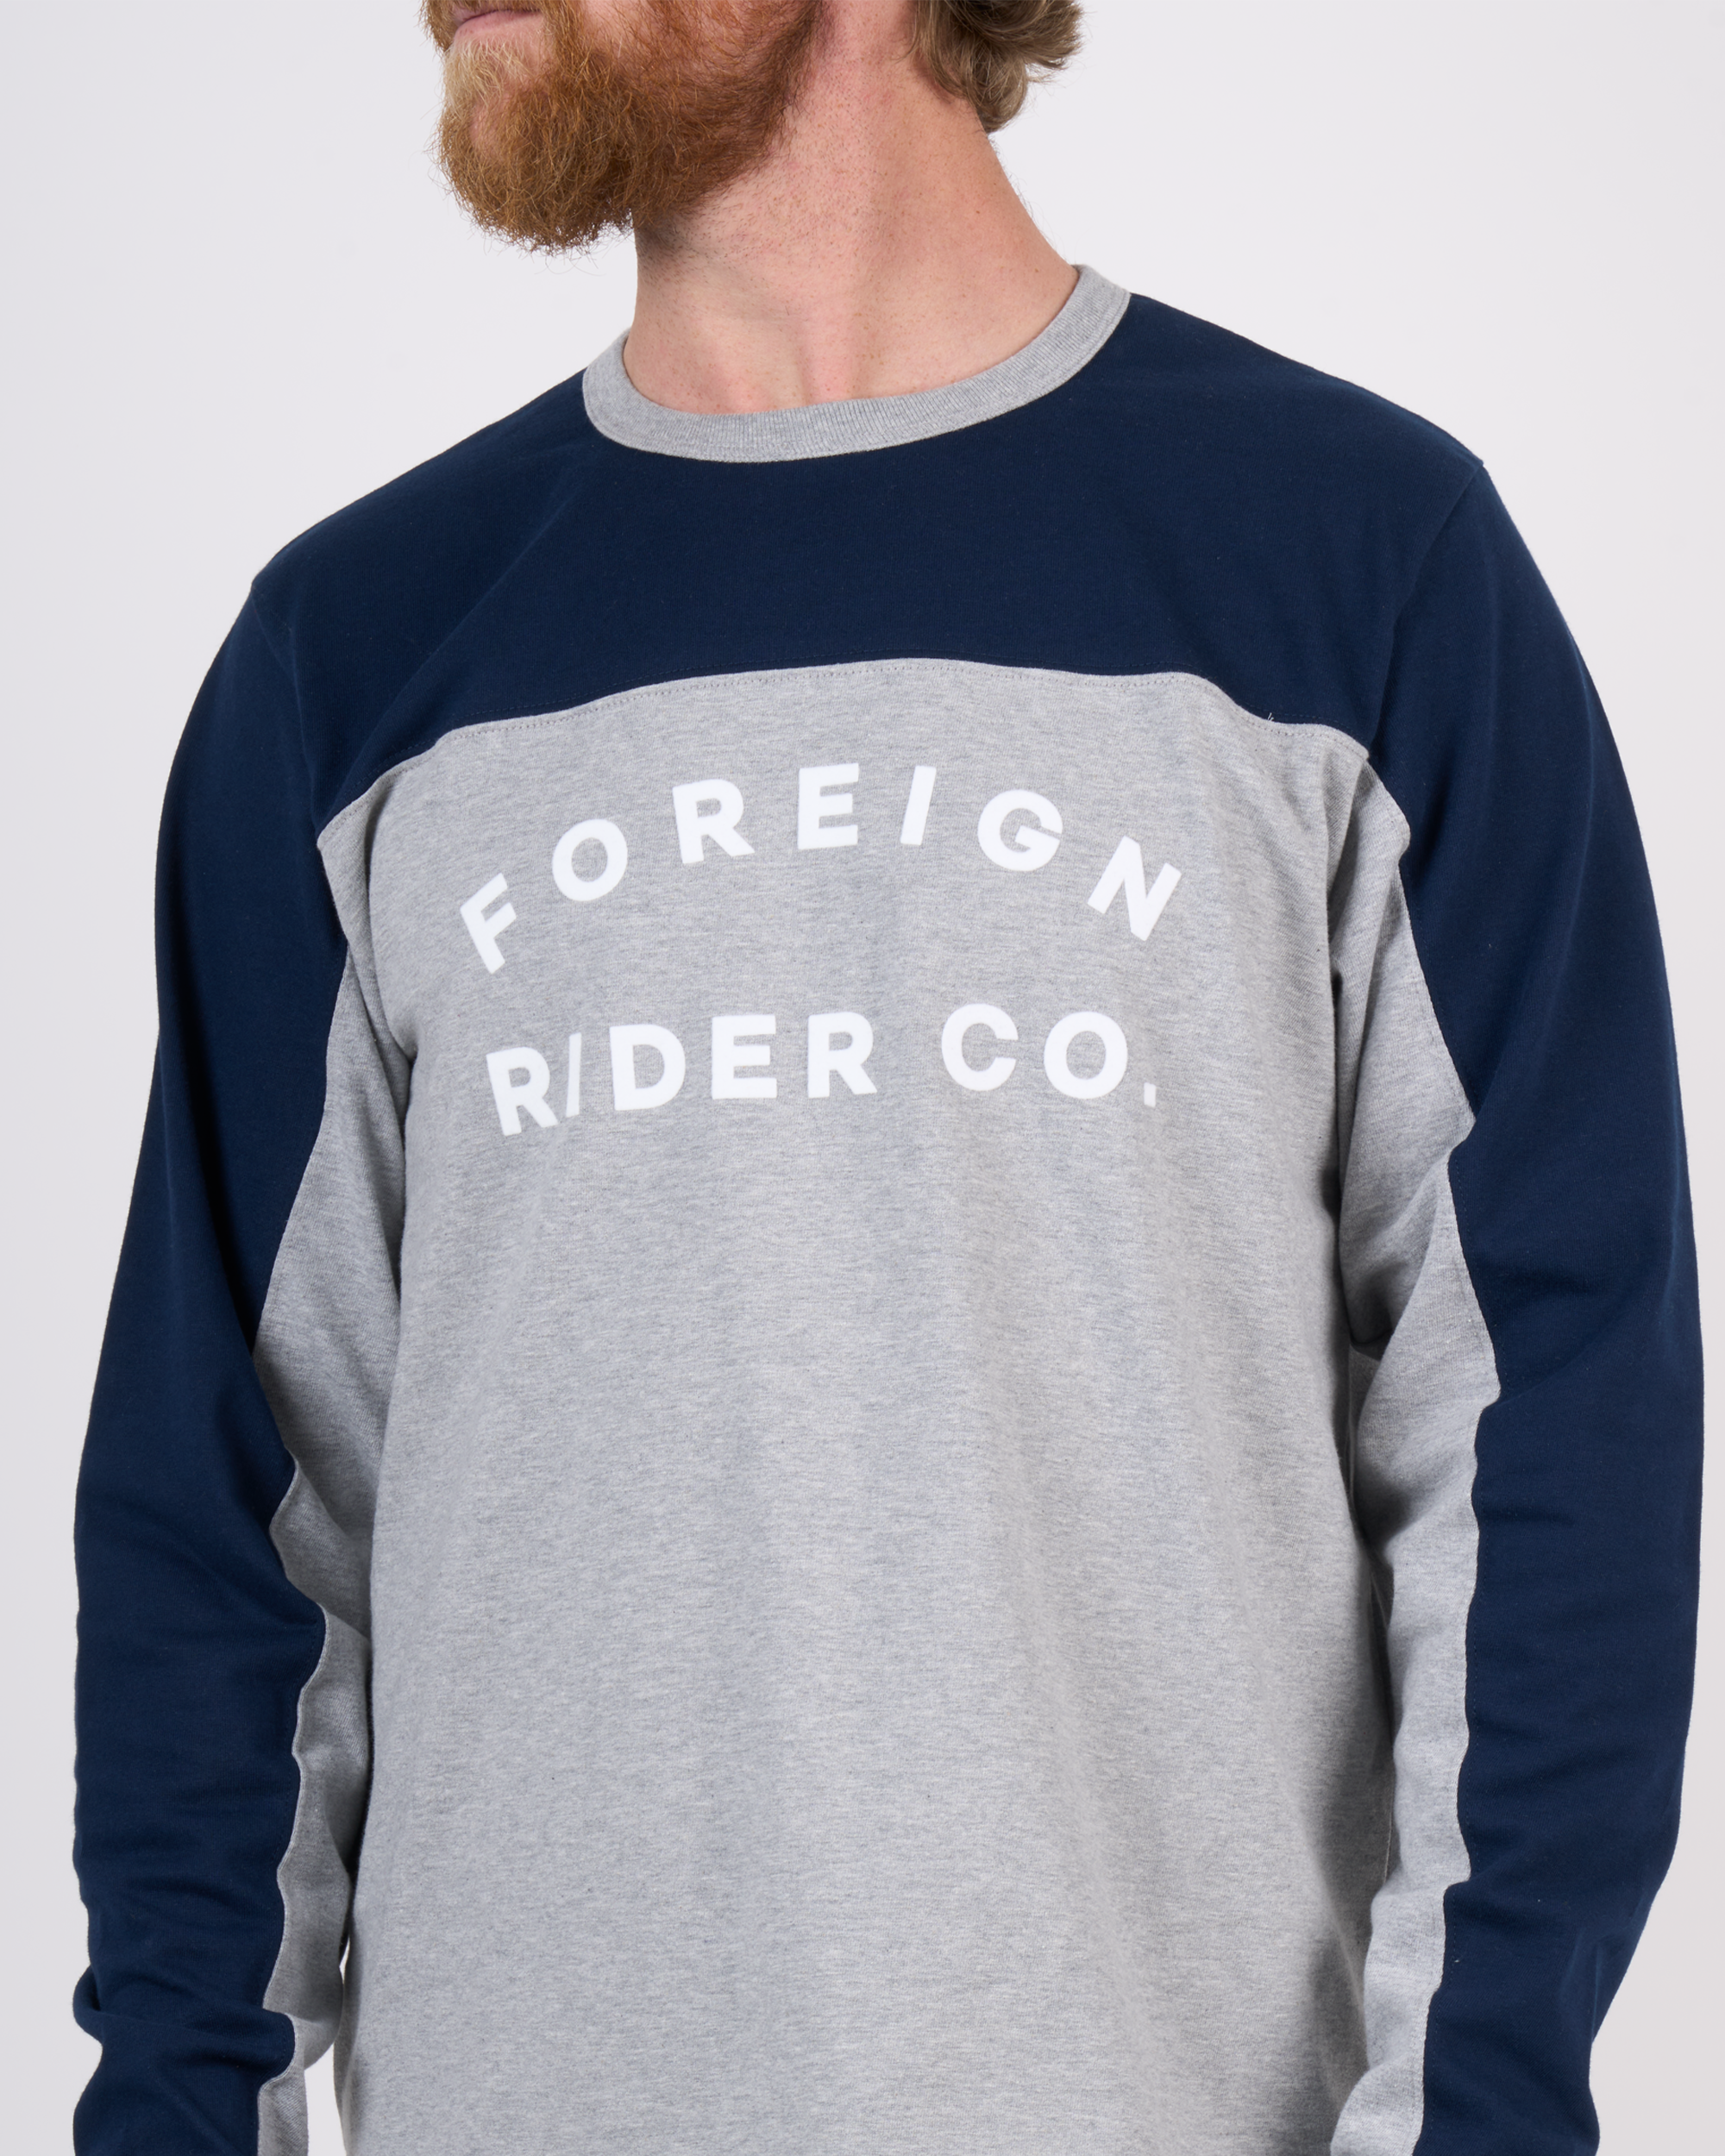 Foreign Rider Co Heavyweight Cotton Navy Grey Color-blocked Long Sleeve T-Shirt Chest Logo Graphic Detail